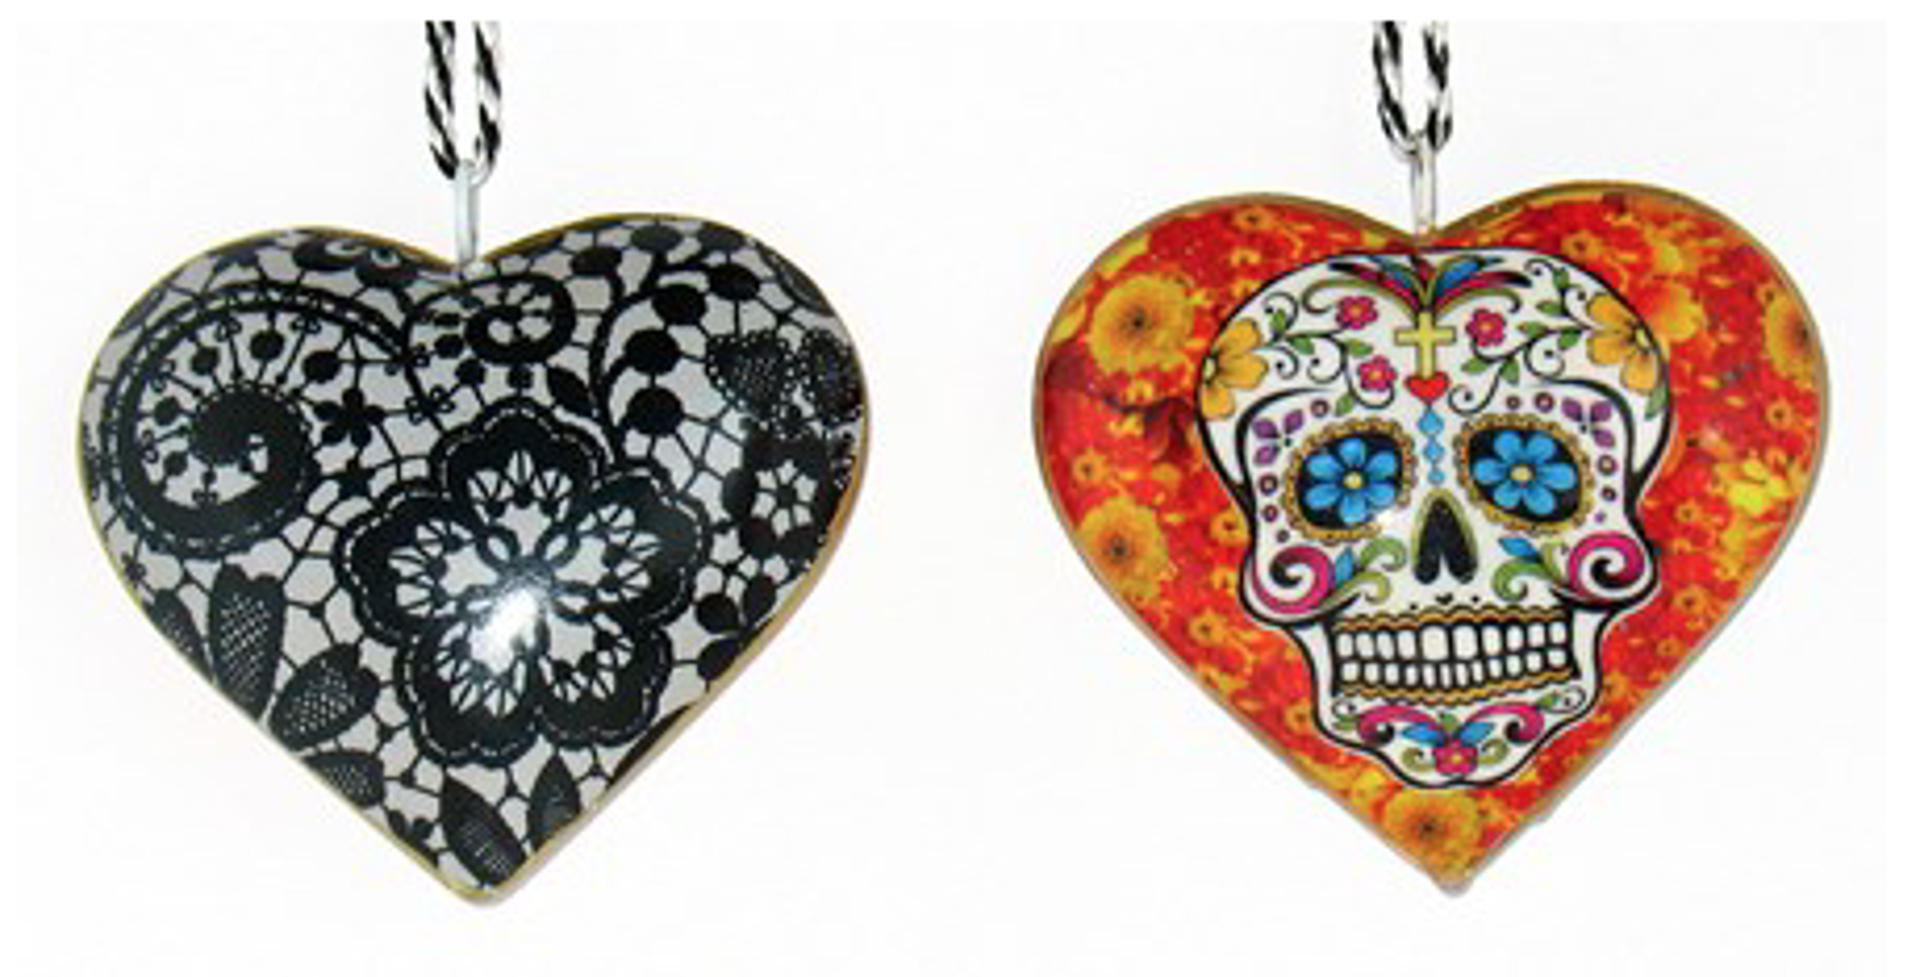 Ornament - 4" Heart With Skull & Marigold by Indigo Desert Ranch - Day of the Dead